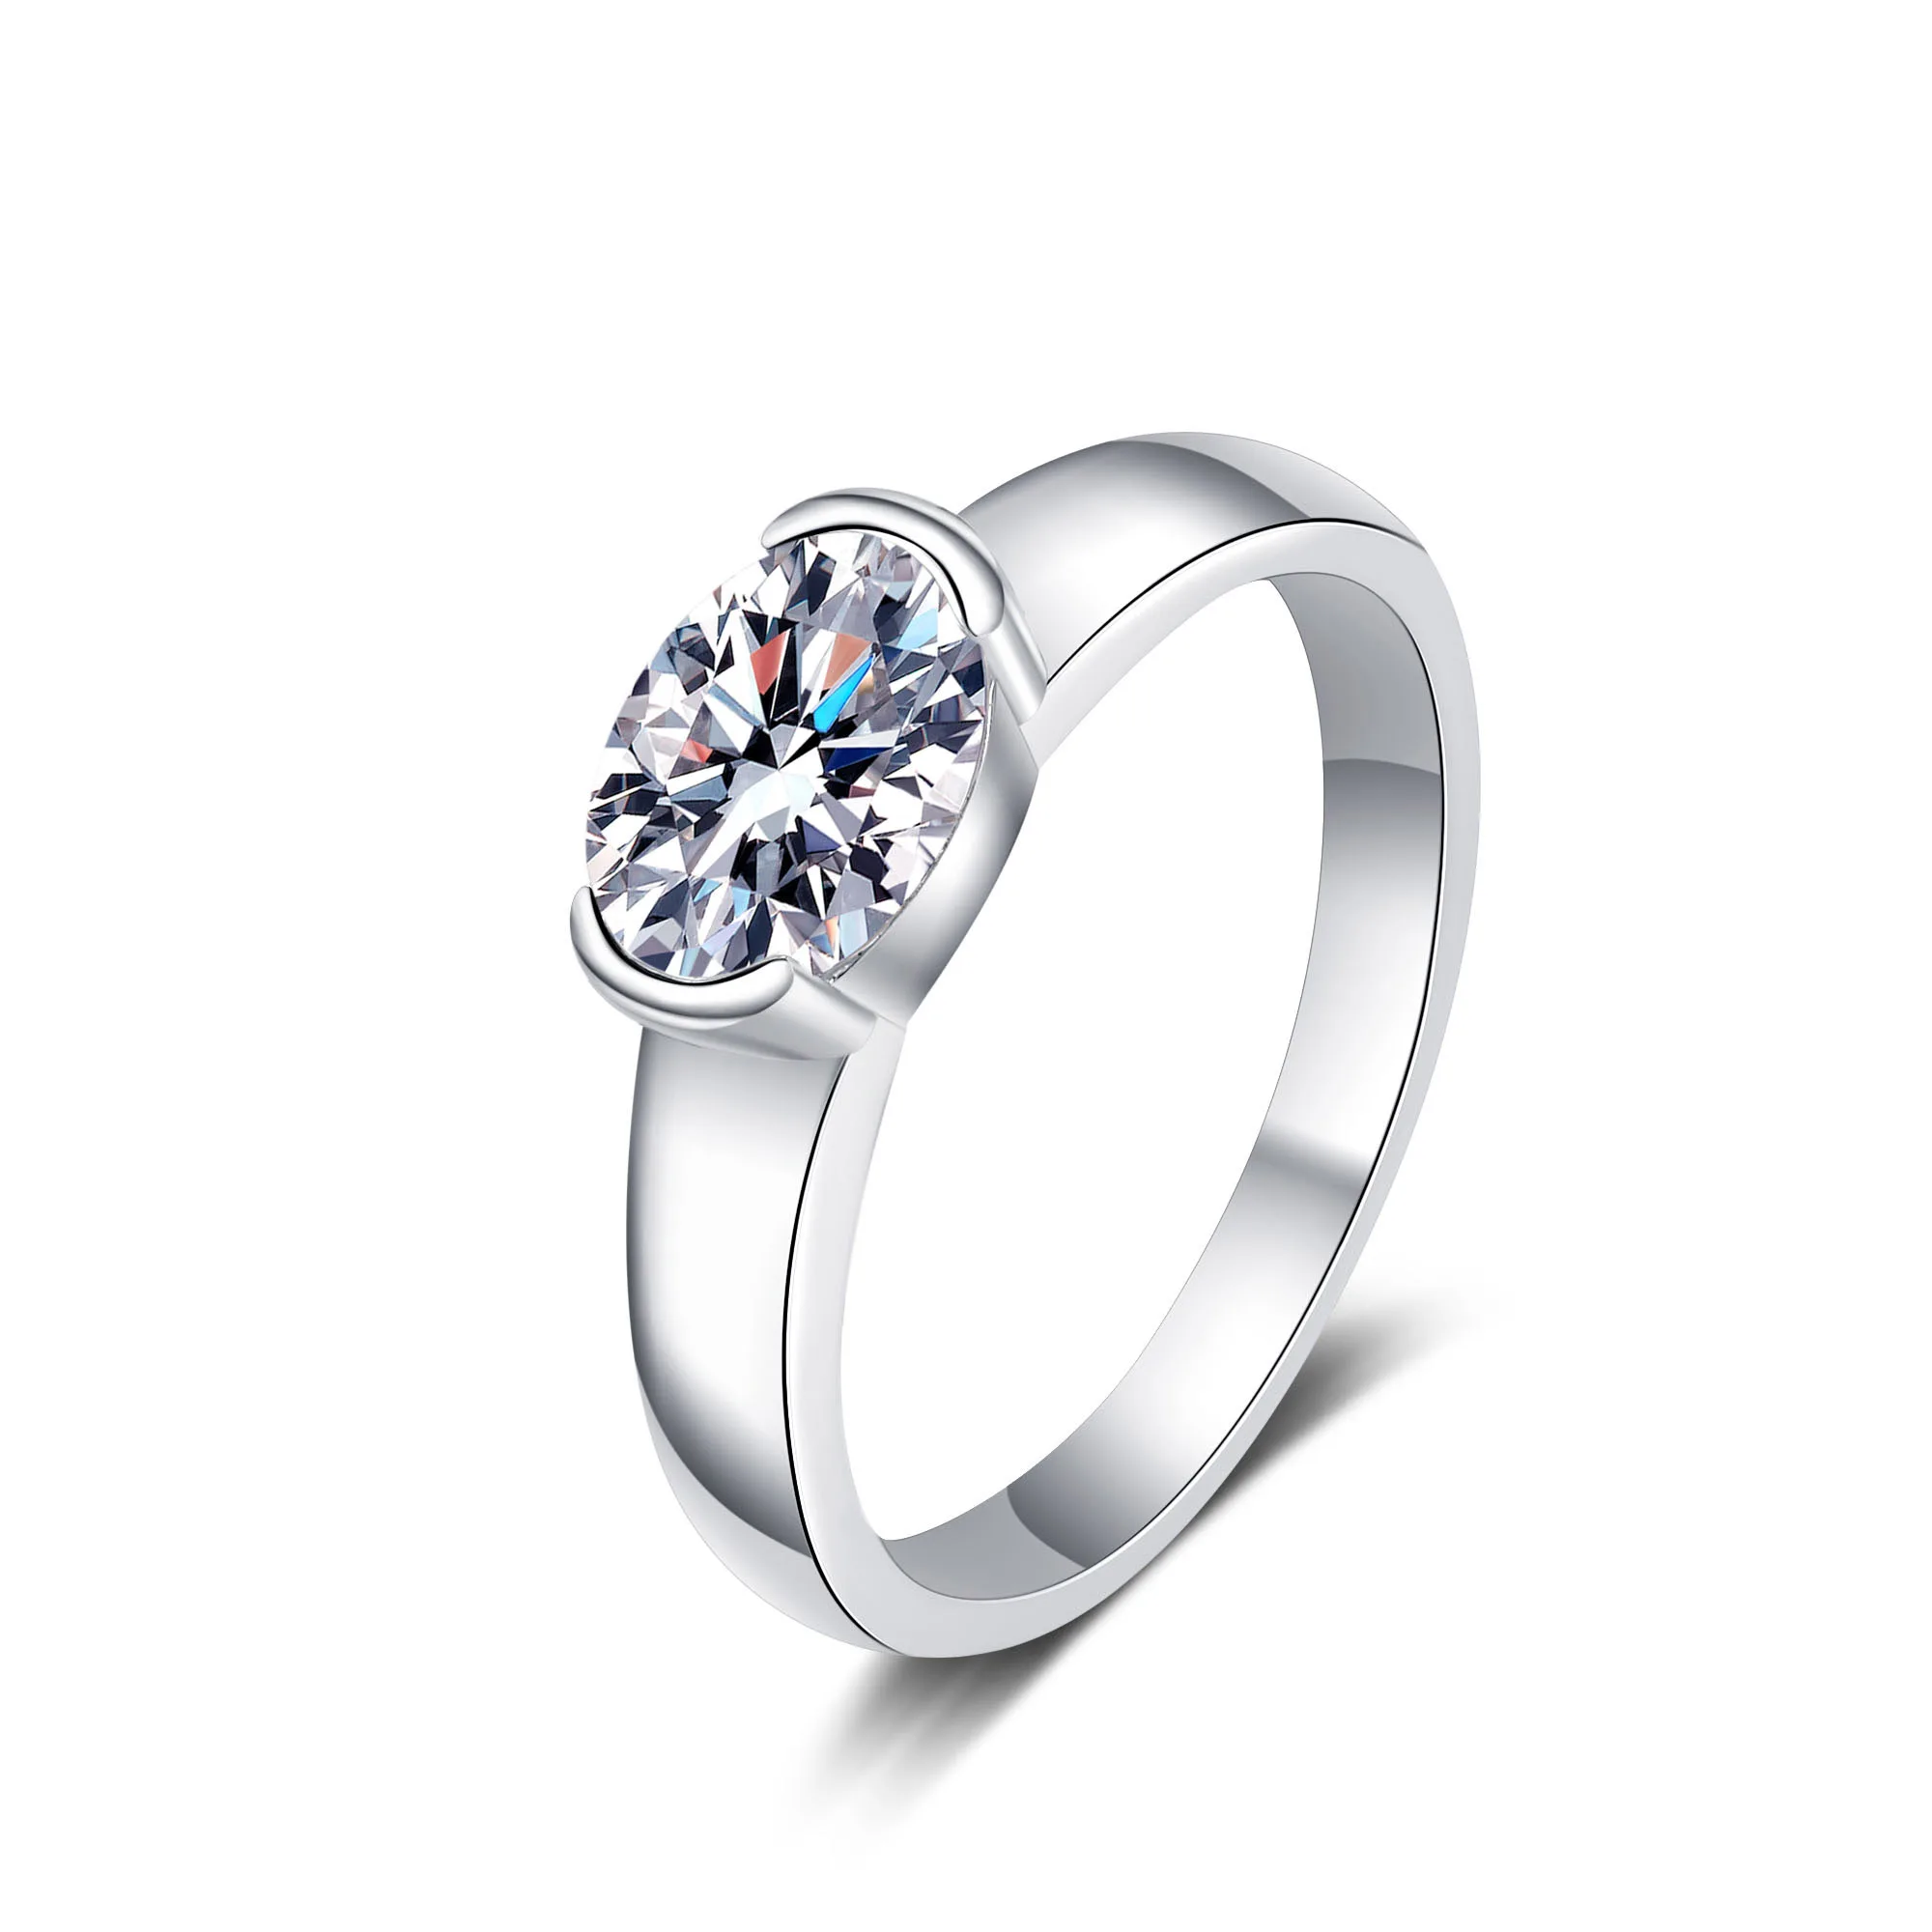 wholesale-of-high-quality-moissanite-couple-holiday-anniversary-gifts-diamond-rings-and-simulated-diamonds-by-manufacturers